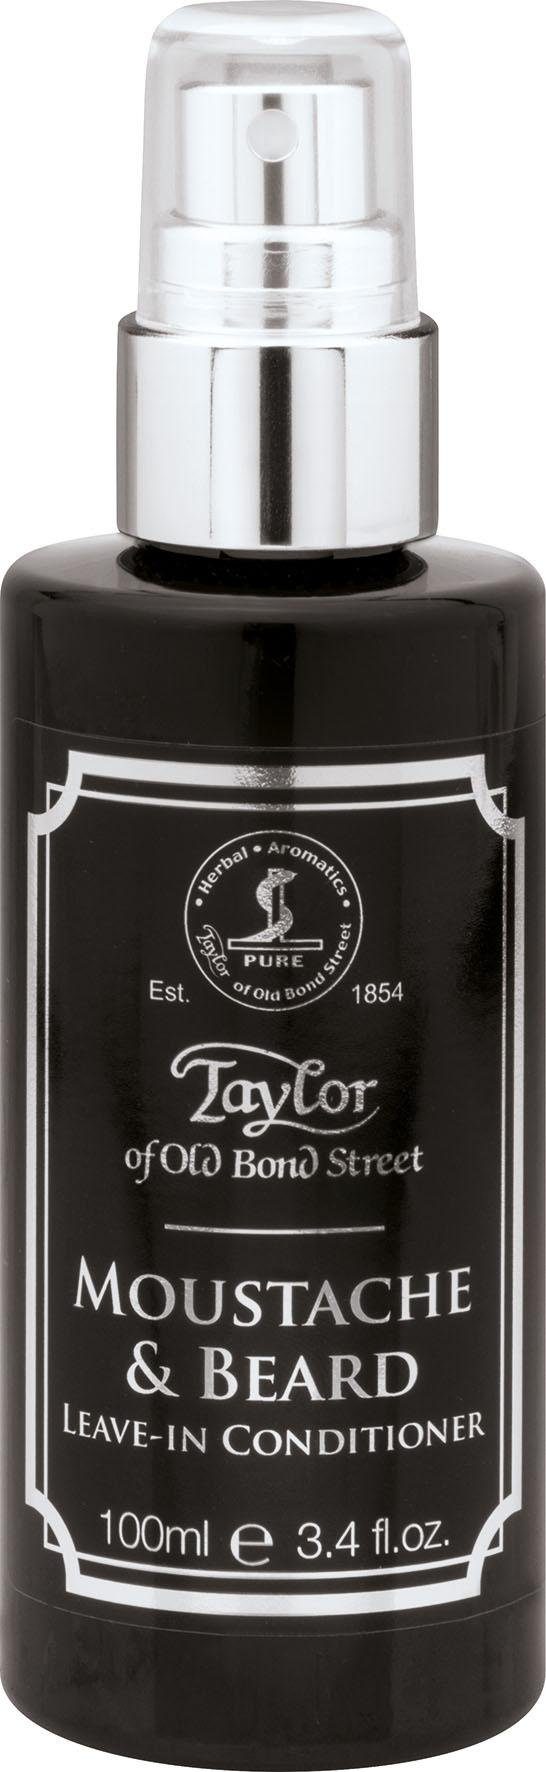 Taylor of Old Street Conditioner & Leave-In Bartconditioner Moustache Bond Beard